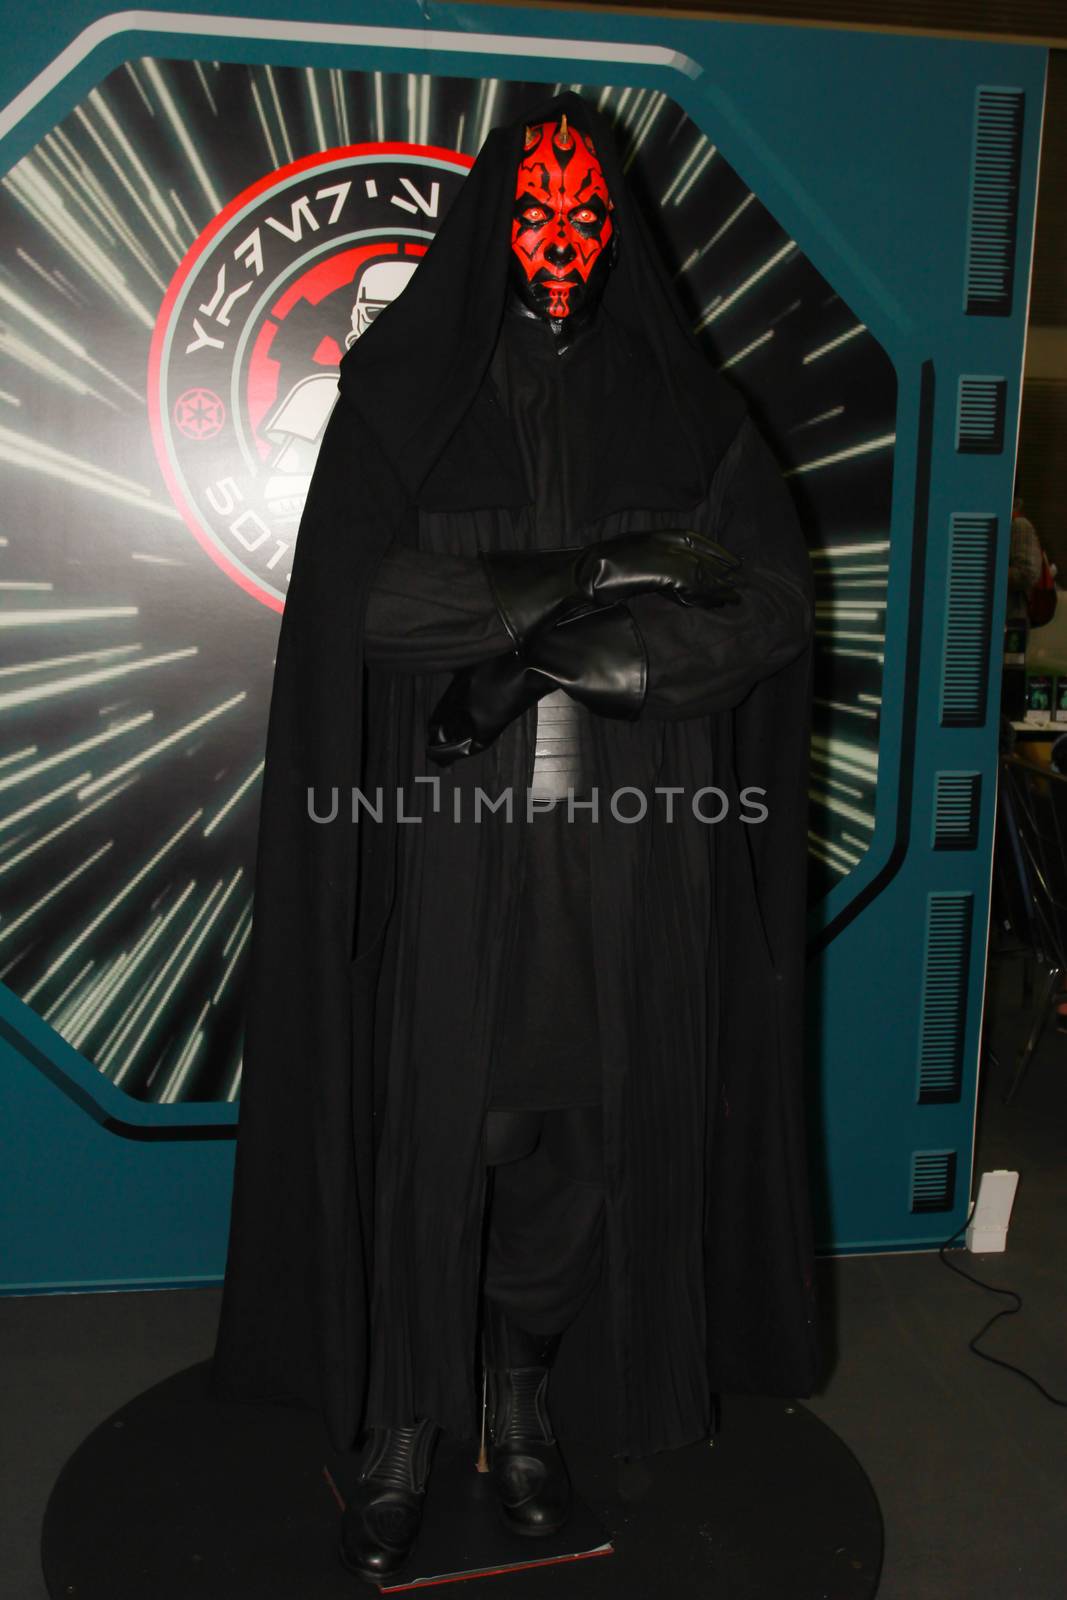 A model of the character Sith Lord from the movies and comics by redthirteen